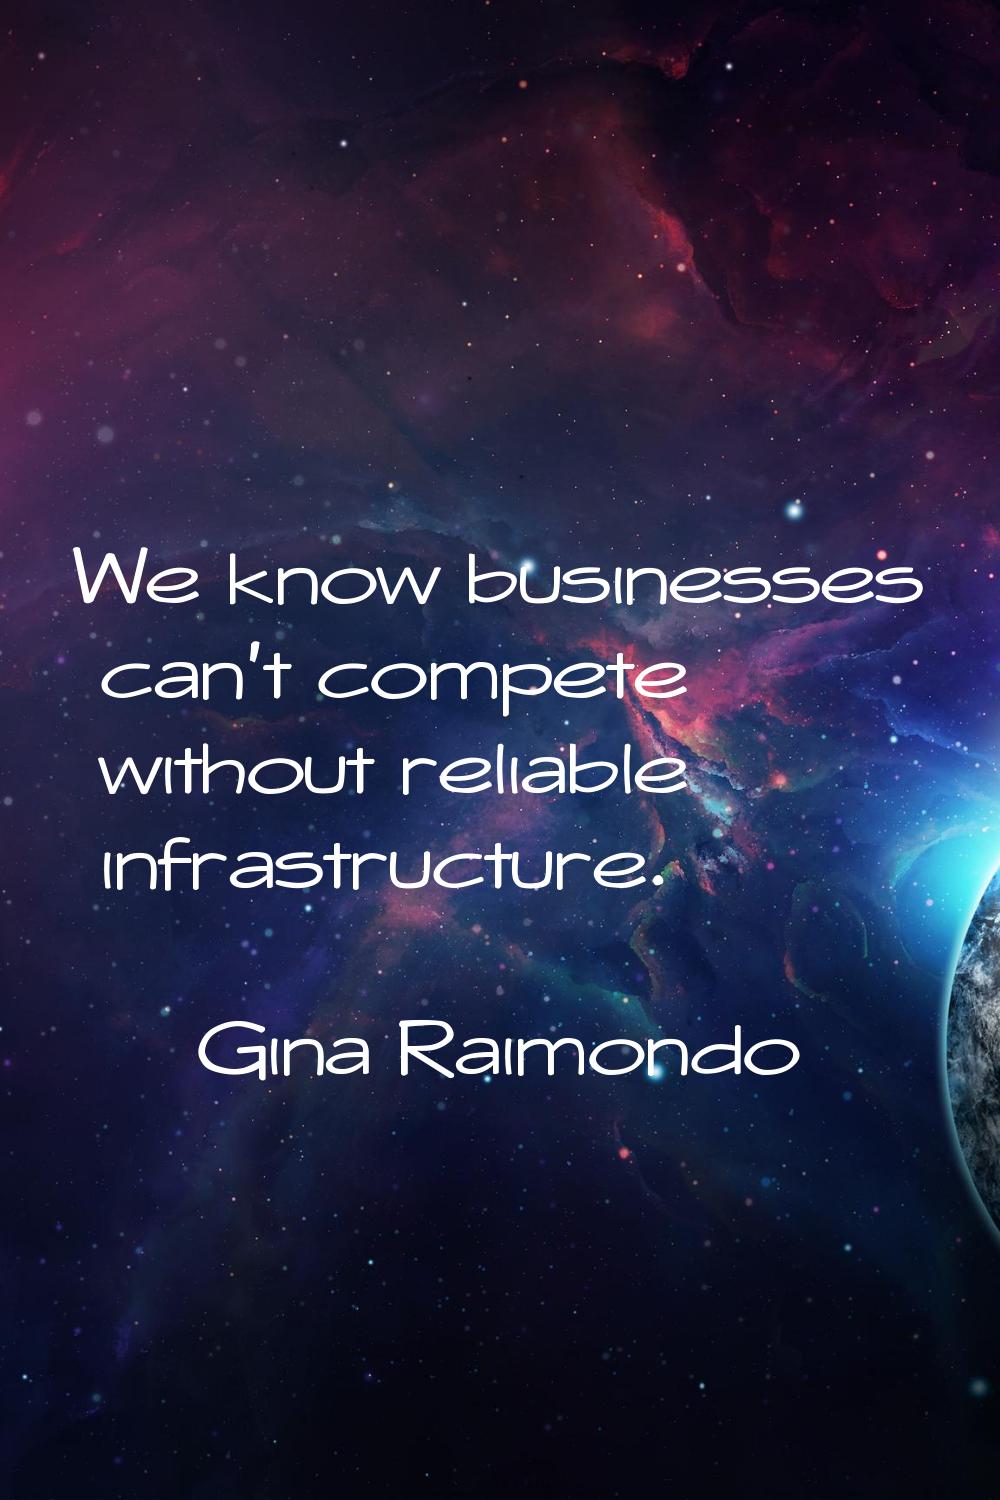 We know businesses can't compete without reliable infrastructure.